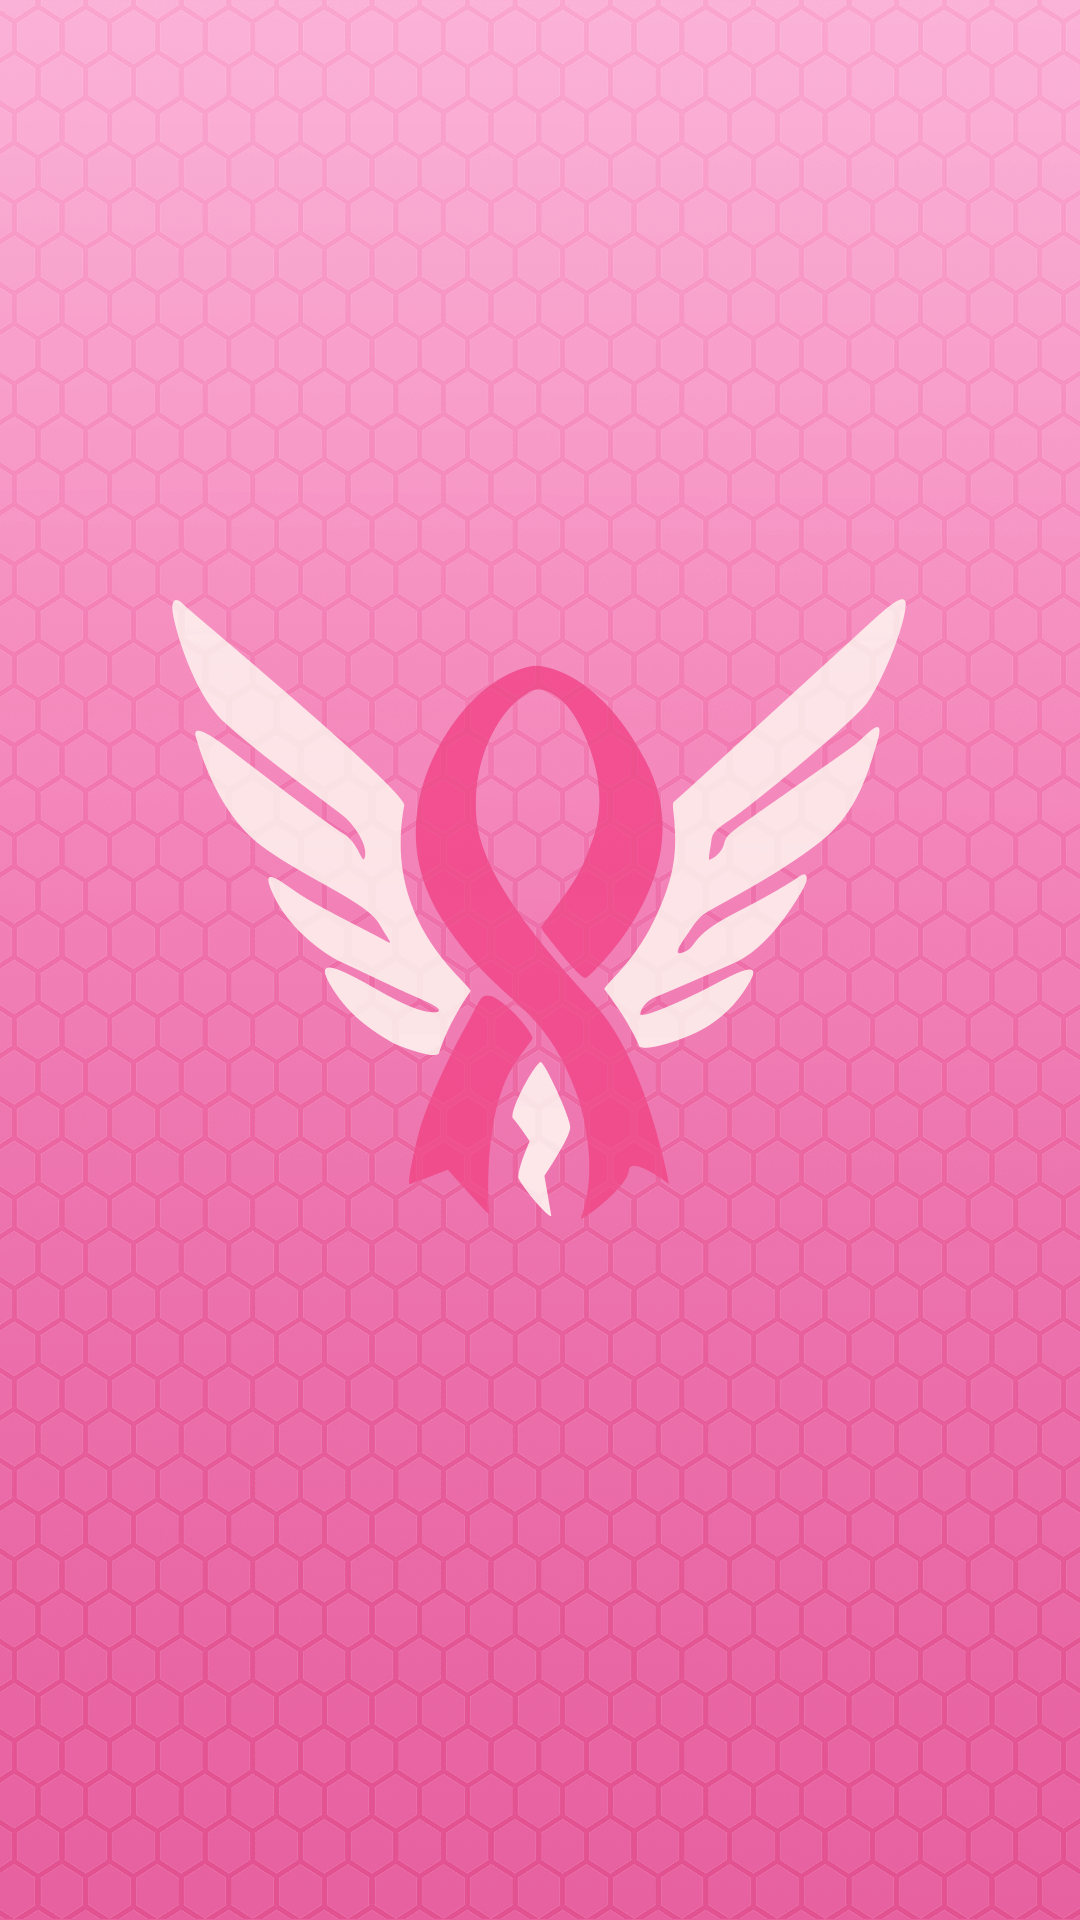 Breast Cancer Awareness Ribbon Isolated Falling Effect 3D Rendering  11947500 PNG